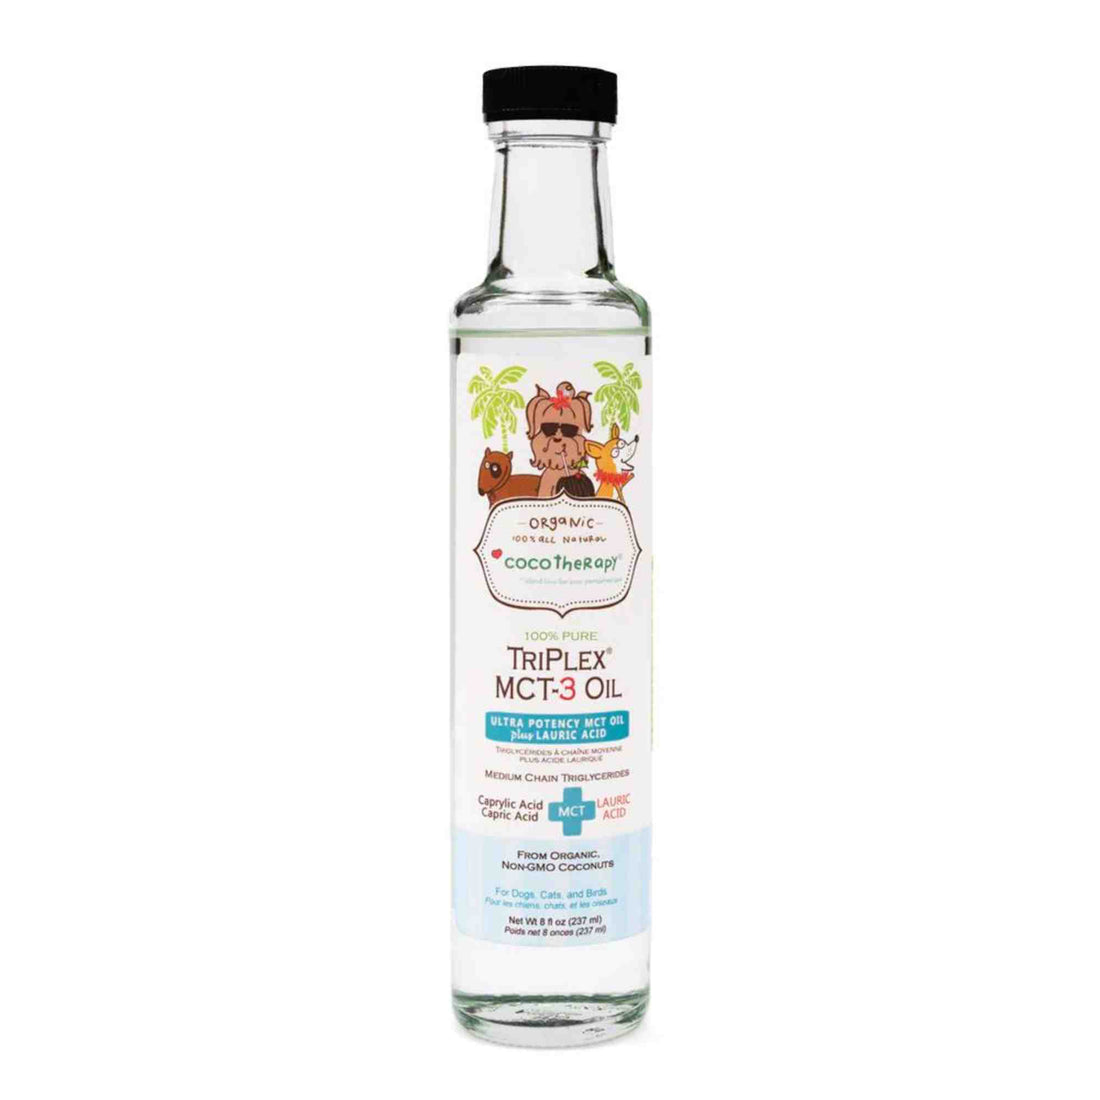 Triplex_MCT3_Oil_Single bottle by cocotherapy made from organic coconuts